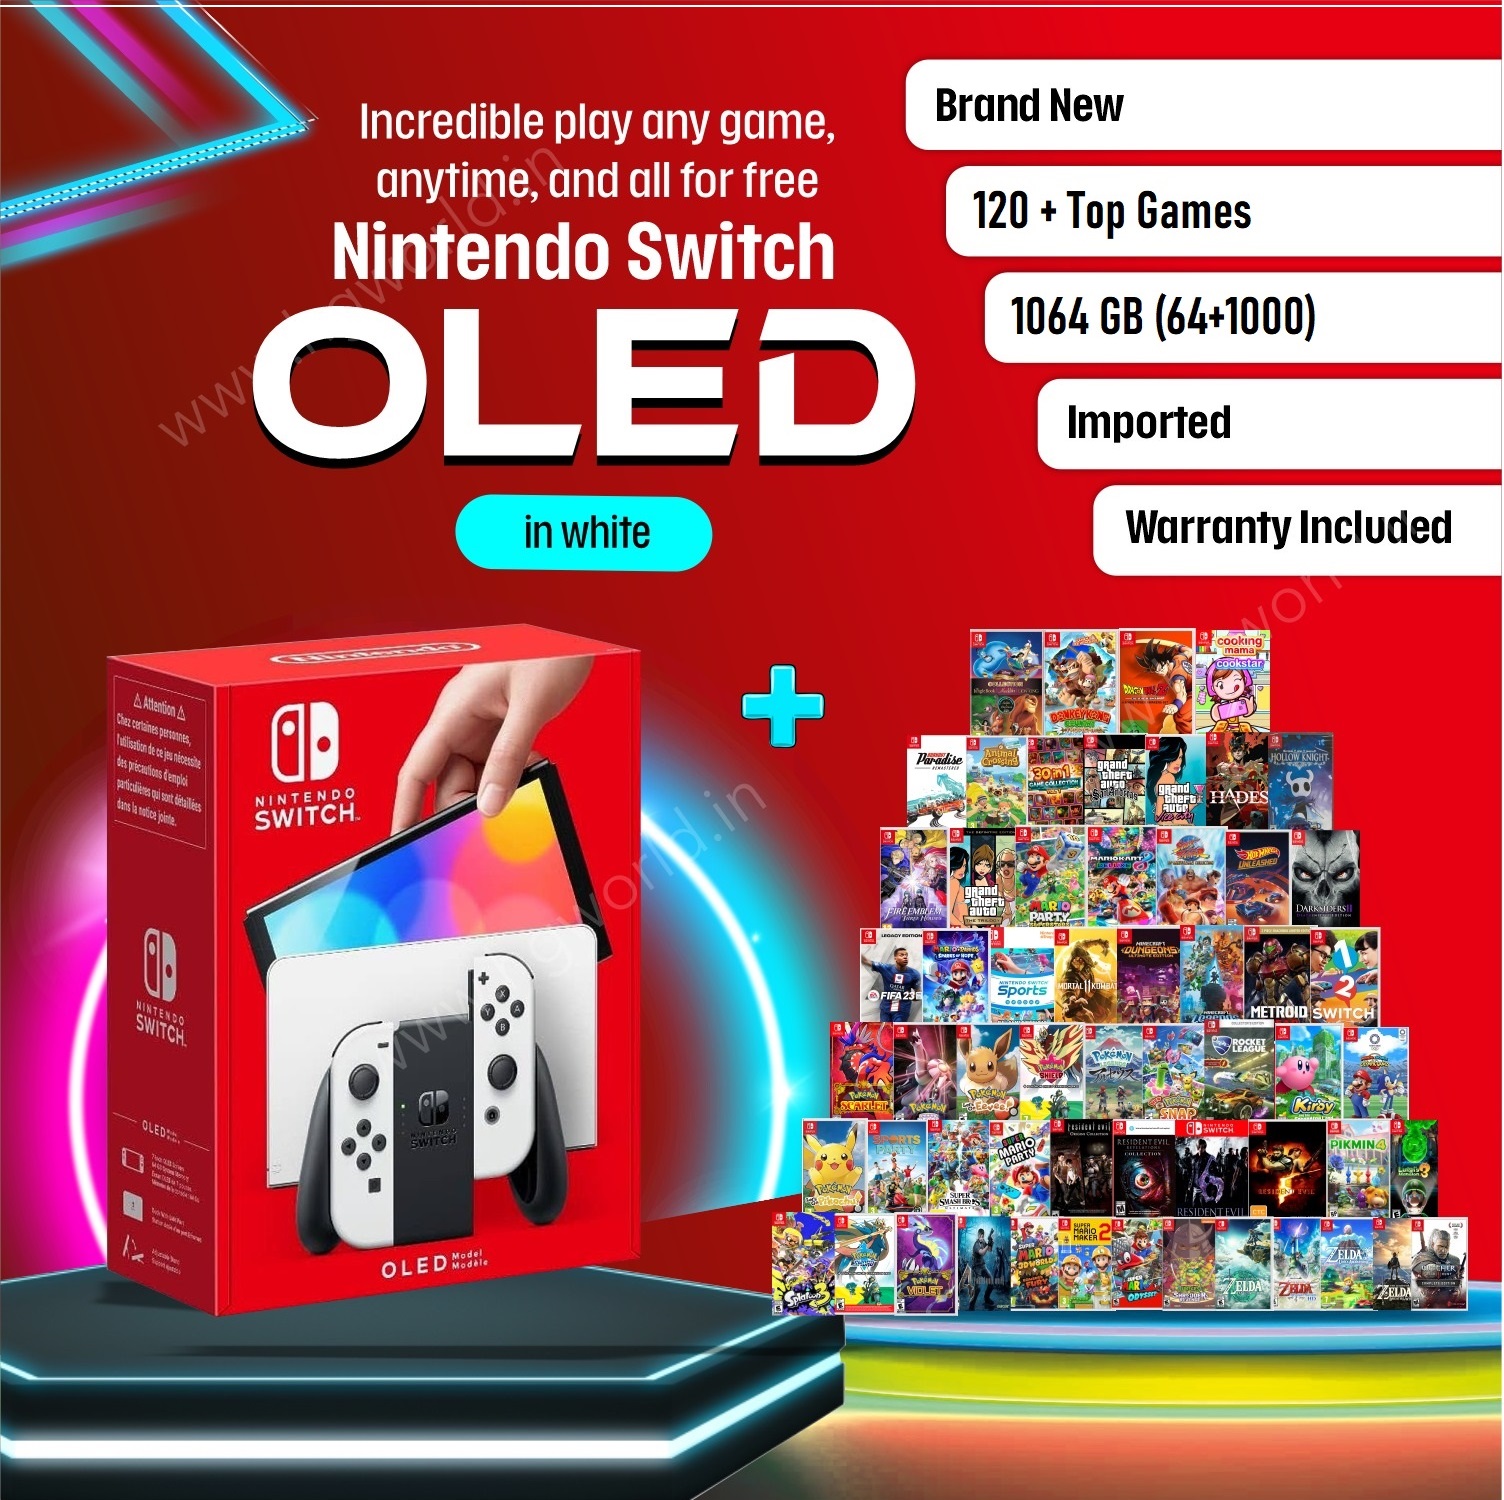 NINTENDO Switch Oled | 120+ Top Games Free | 1064 GB Internal(64+1000) |  Handheld Portable Gaming Console | All Standard Accessories | Warranty 